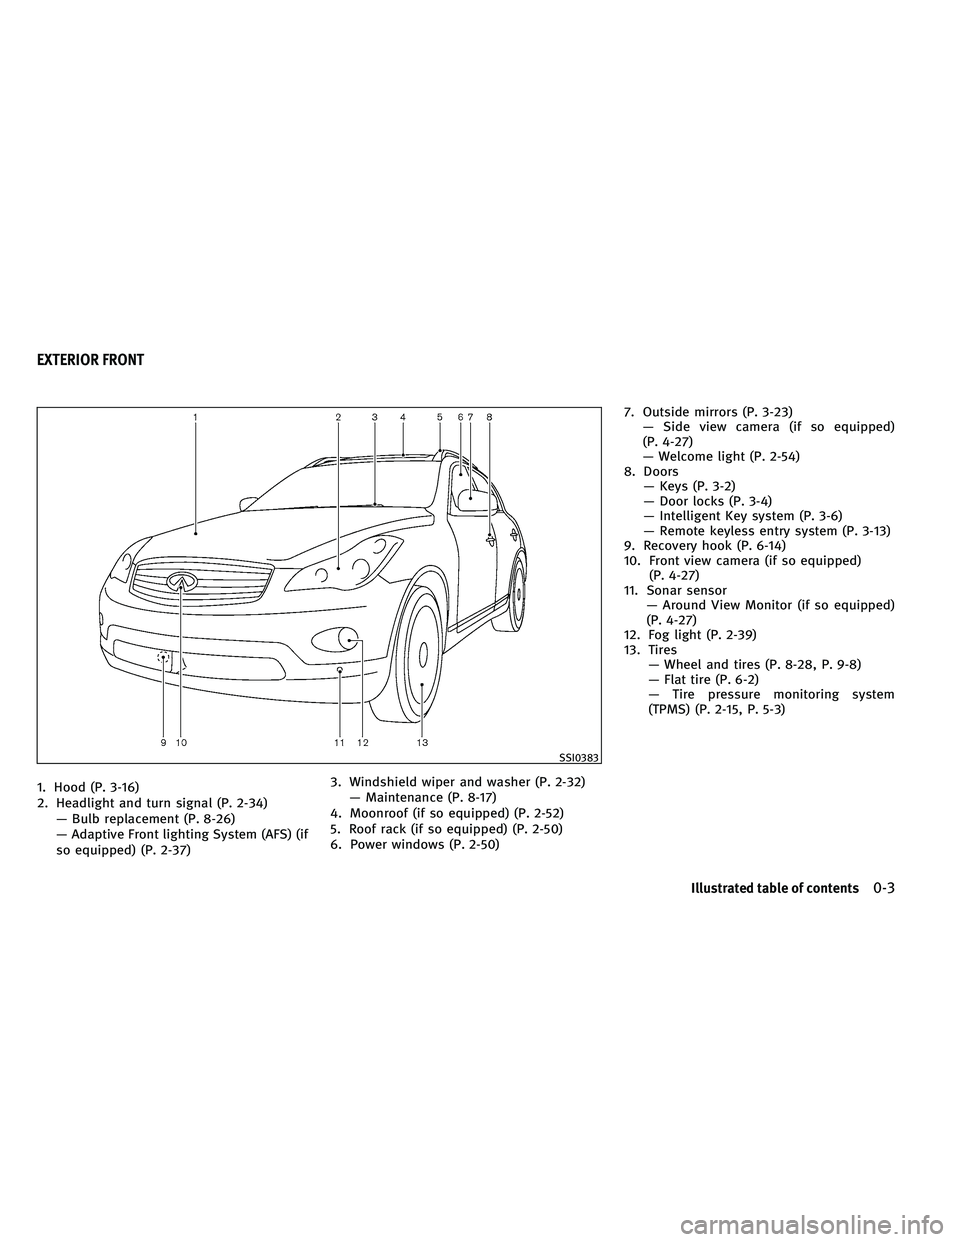 INFINITI EX 2011  Owners Manual 1. Hood (P. 3-16)
2. Headlight and turn signal (P. 2-34)— Bulb replacement (P. 8-26)
— Adaptive Front lighting System (AFS) (if
so equipped) (P. 2-37) 3. Windshield wiper and washer (P. 2-32)
— 